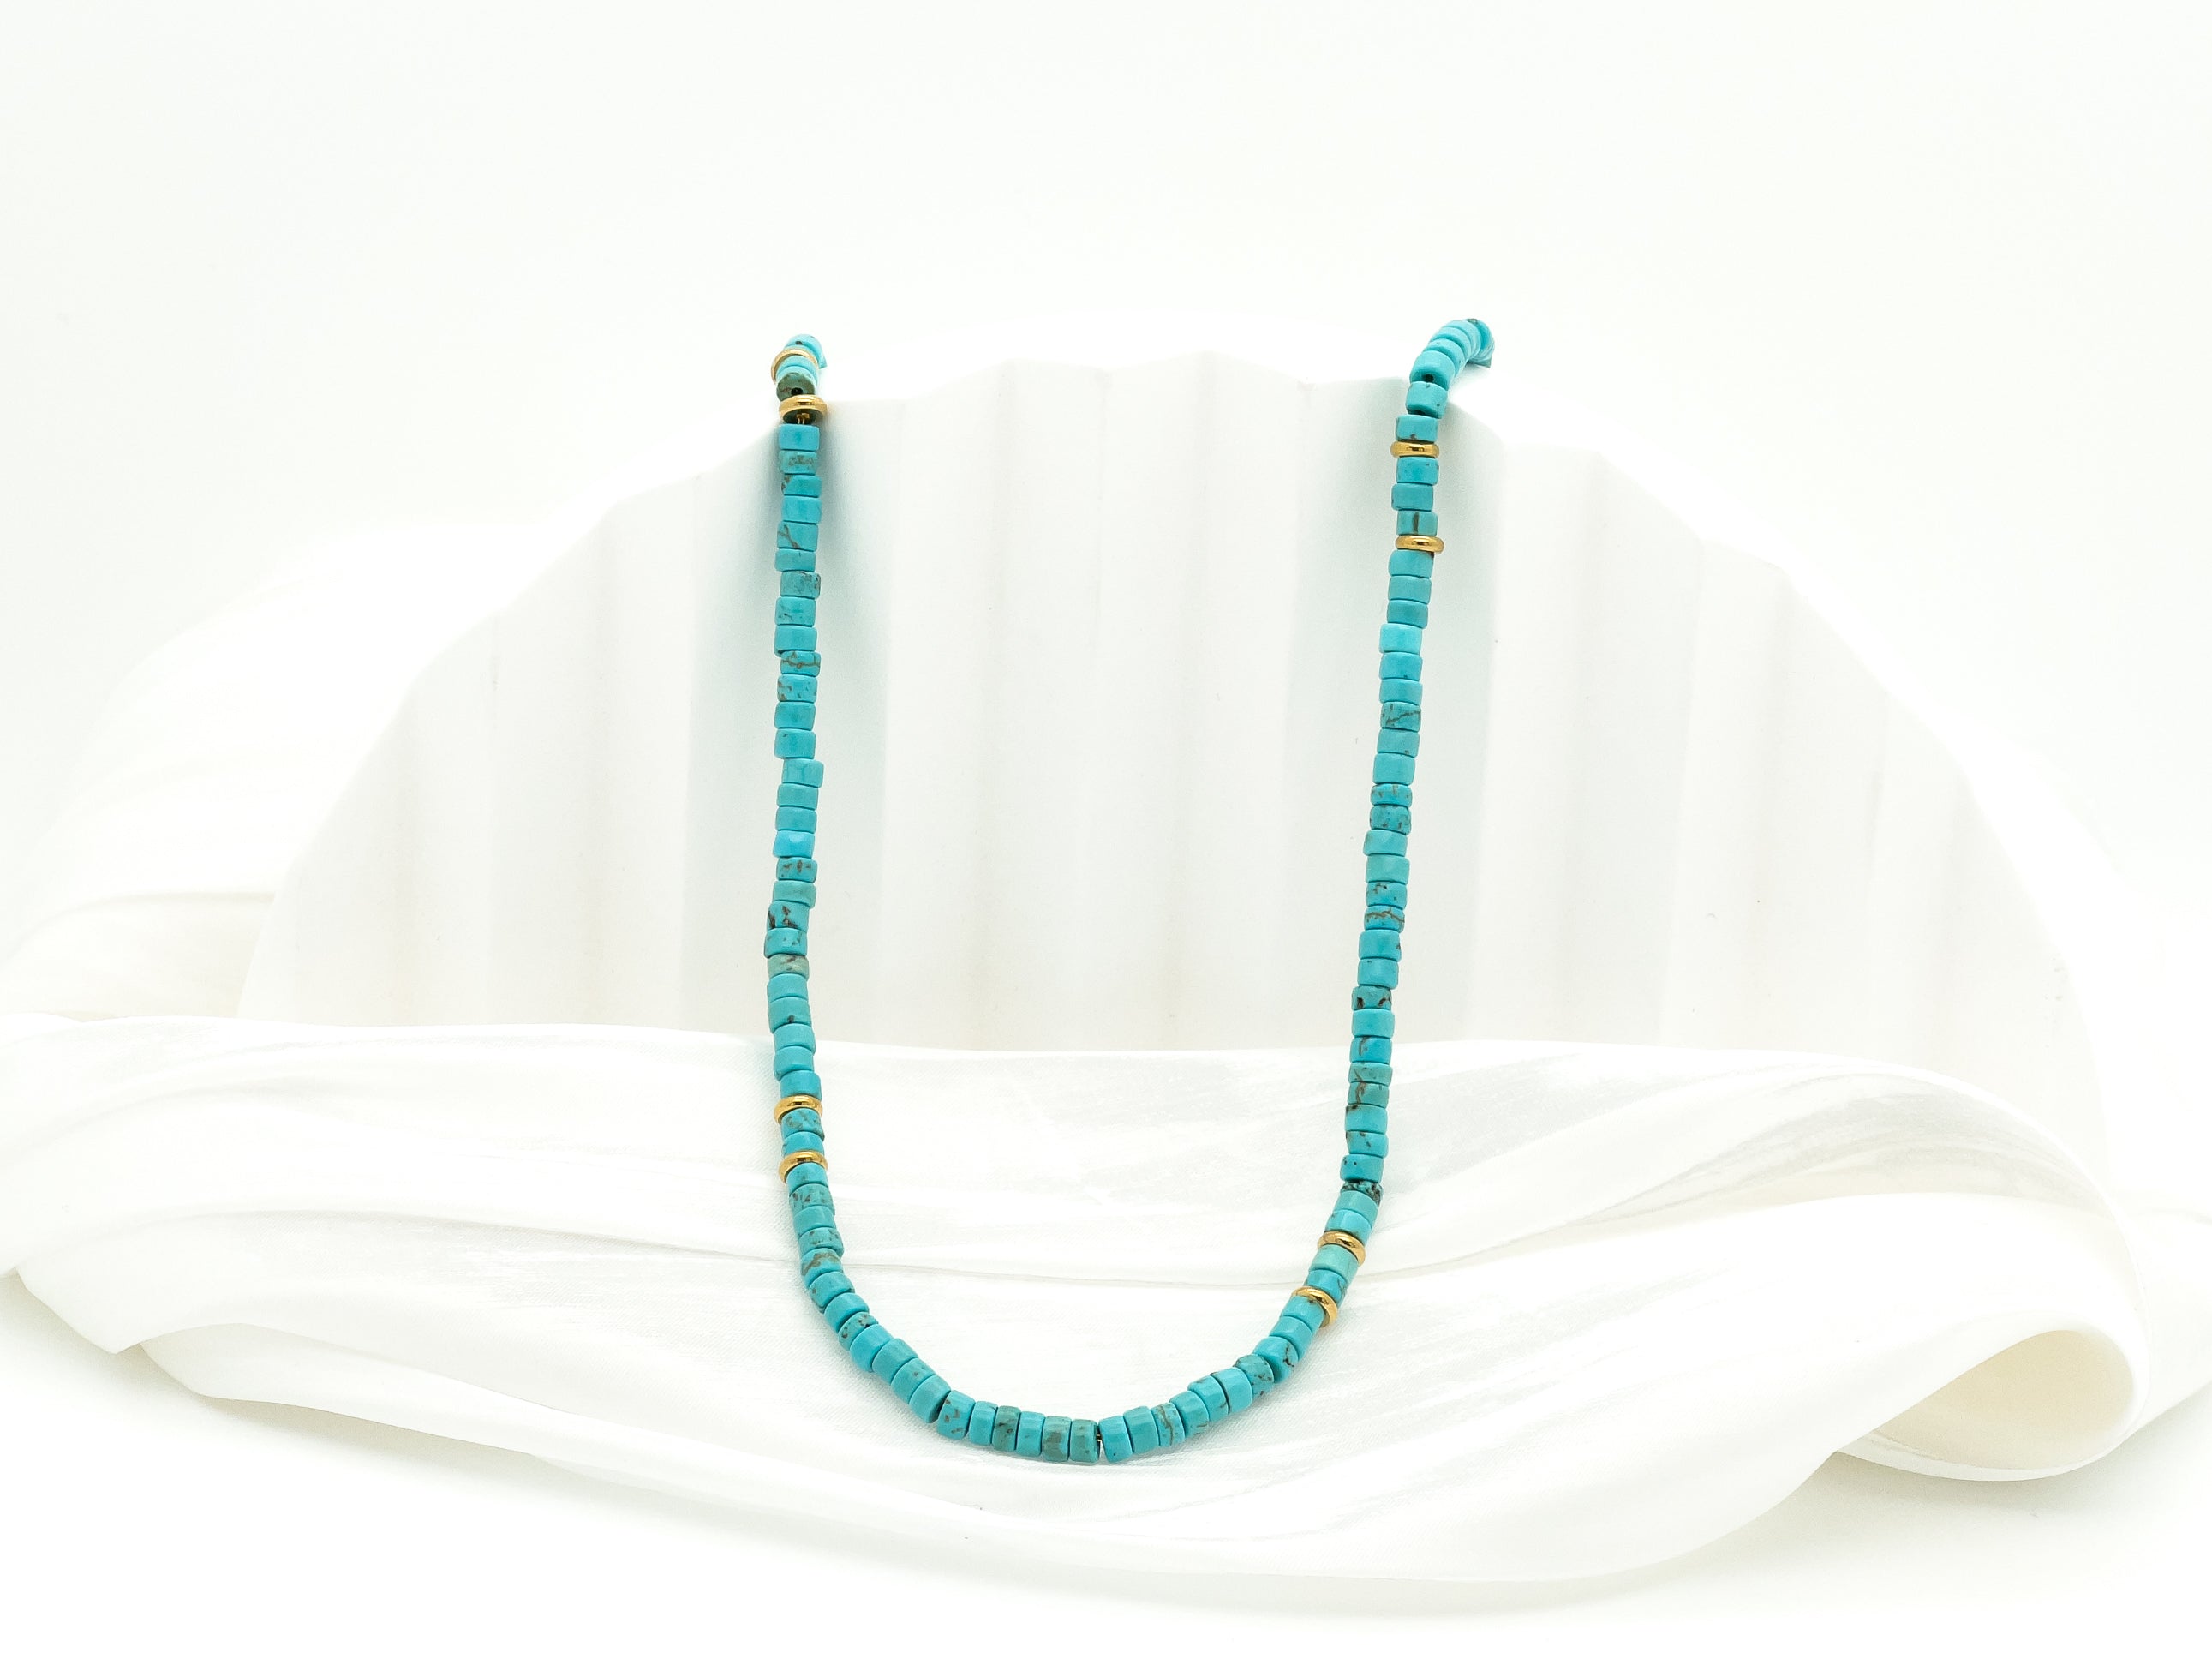 Earthy Blue Turquoise Choker Necklace - Everyday Jewelry | Chic Chic Bon